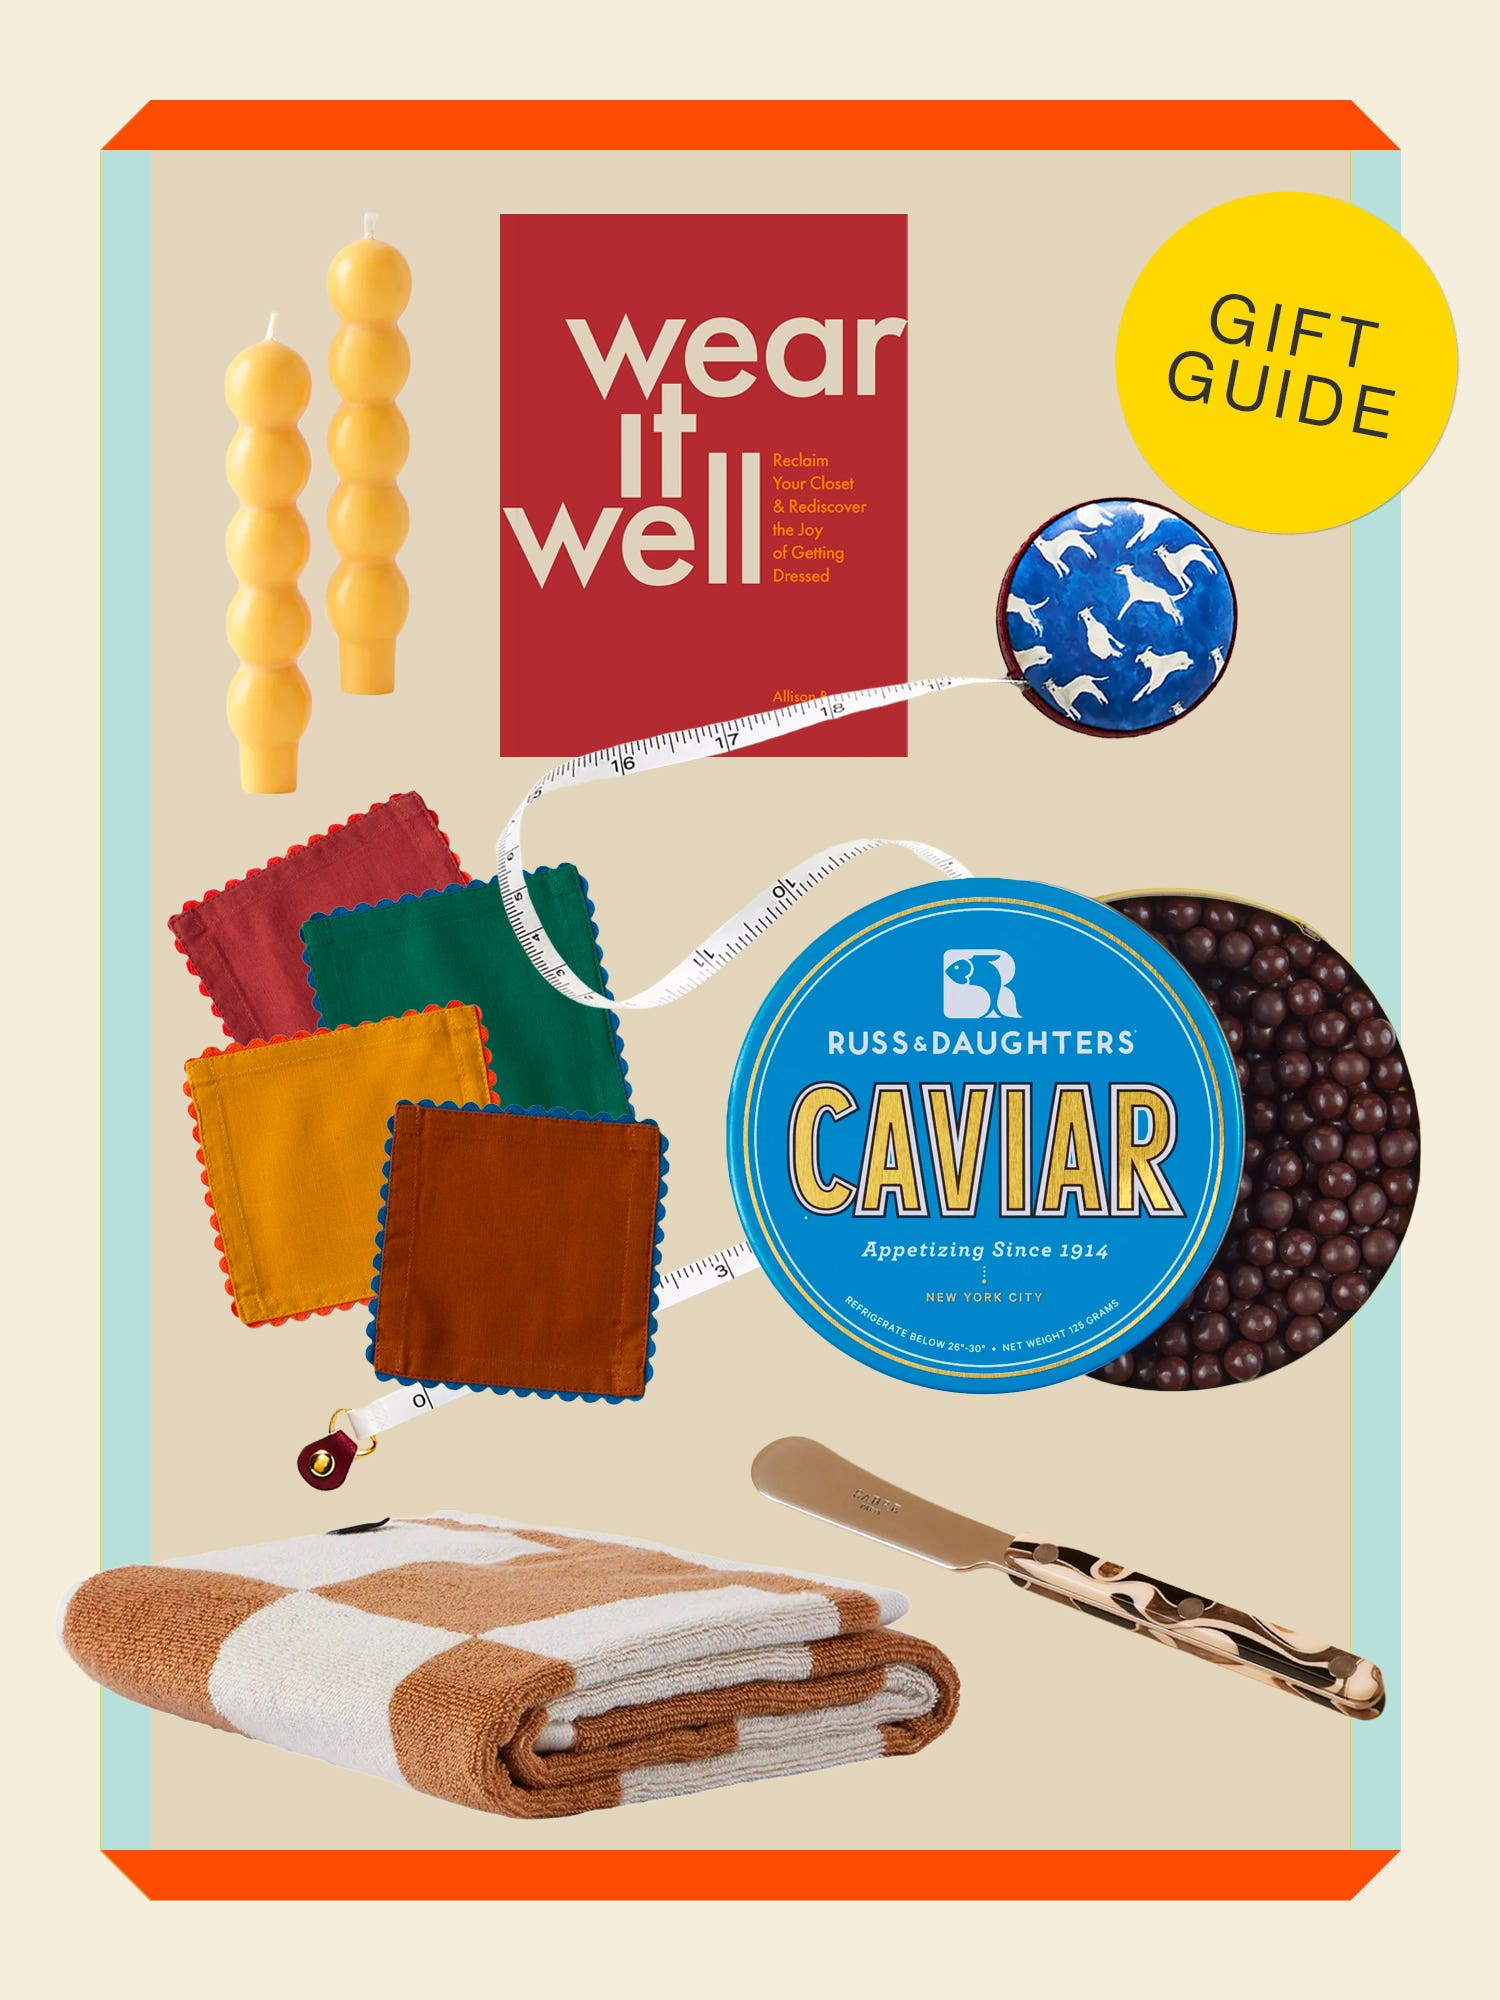 under $25 gift collage featuring chocolate caviar tin, tapers, and more with gift guide button